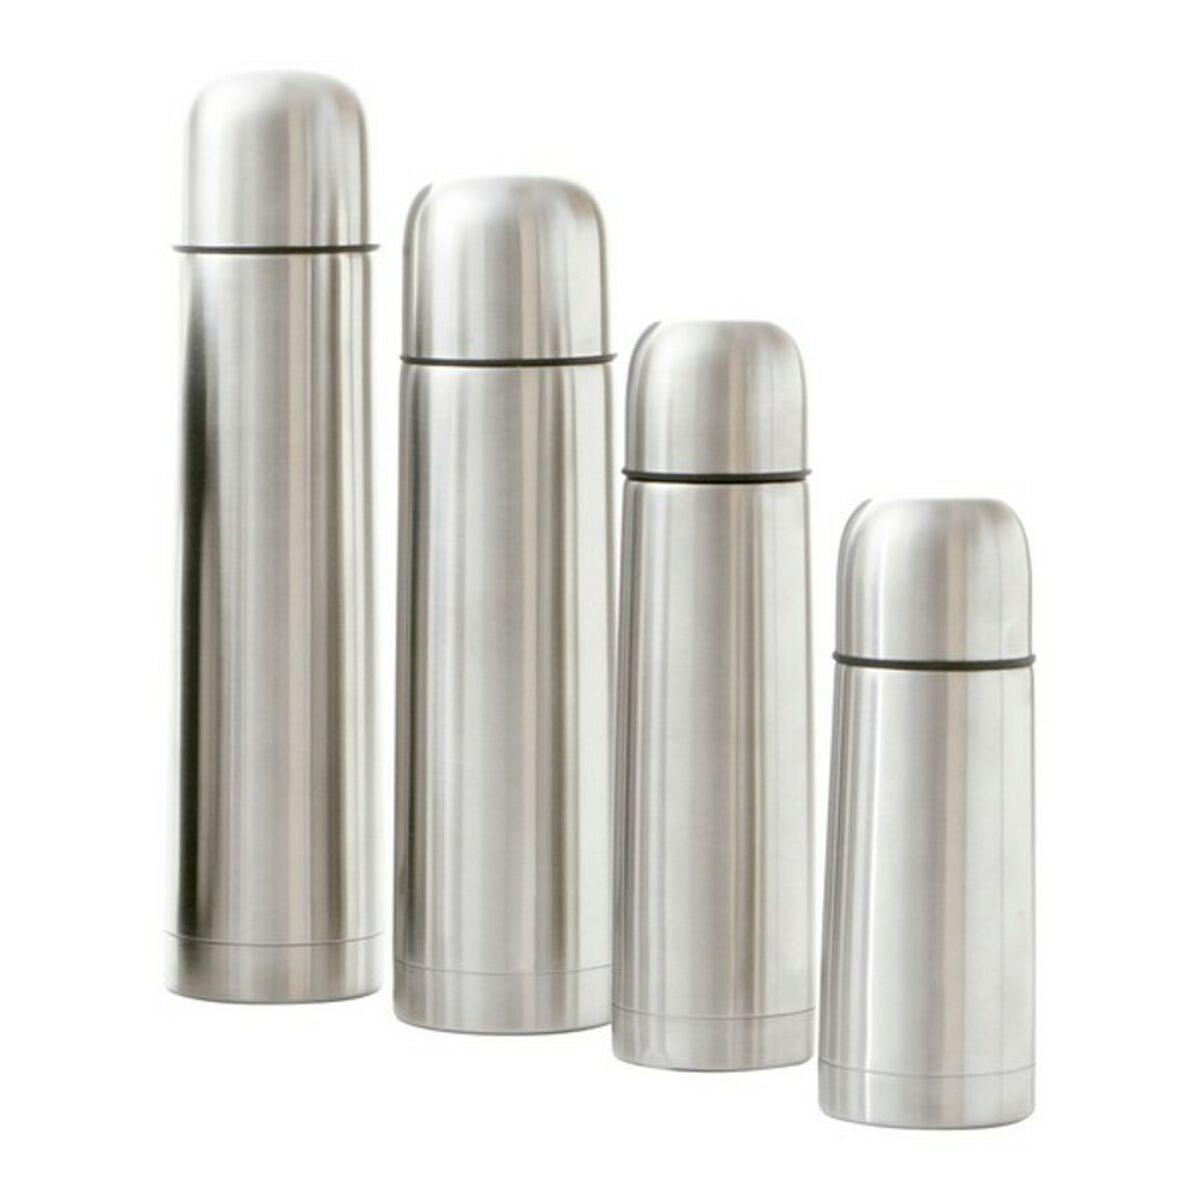 Travel thermos flask Quid Xylon Metal Steel Stainless steel 500 ml - VirtuousWares:Global